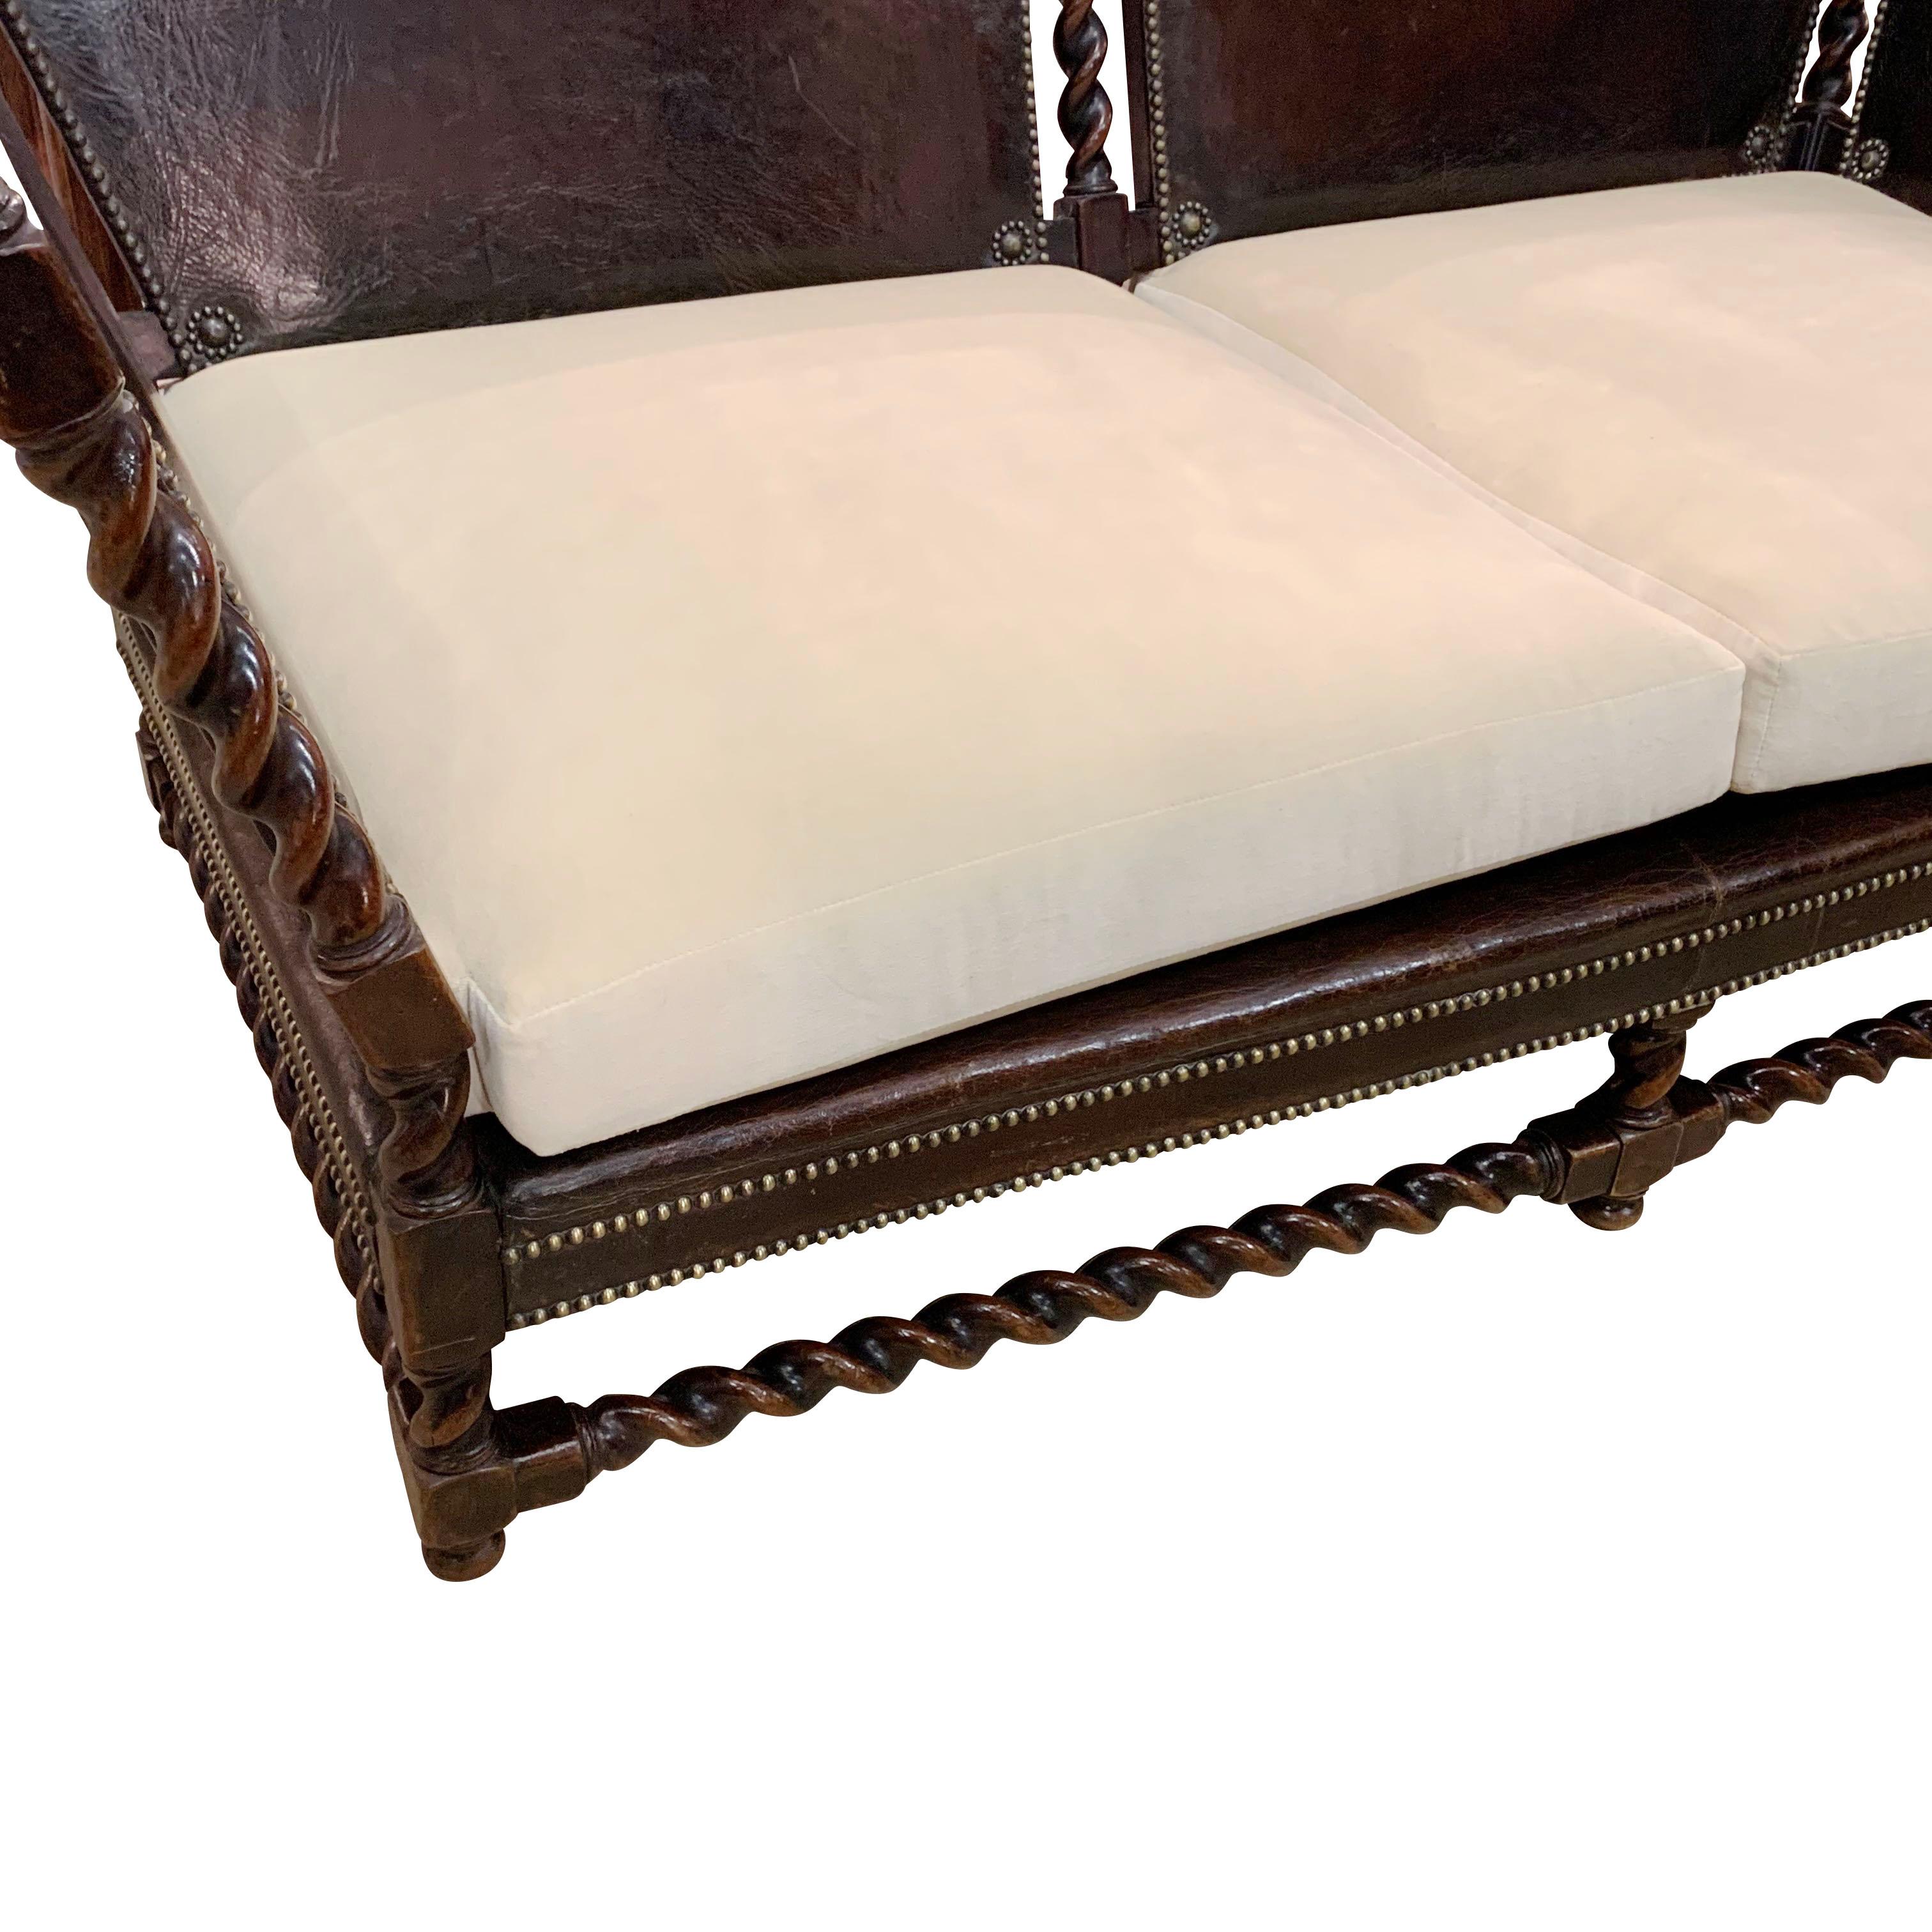 1890 French leather with brass stud detailing setee
Angled side arms
Spindle legs and arms
New seat and back cushions.
  